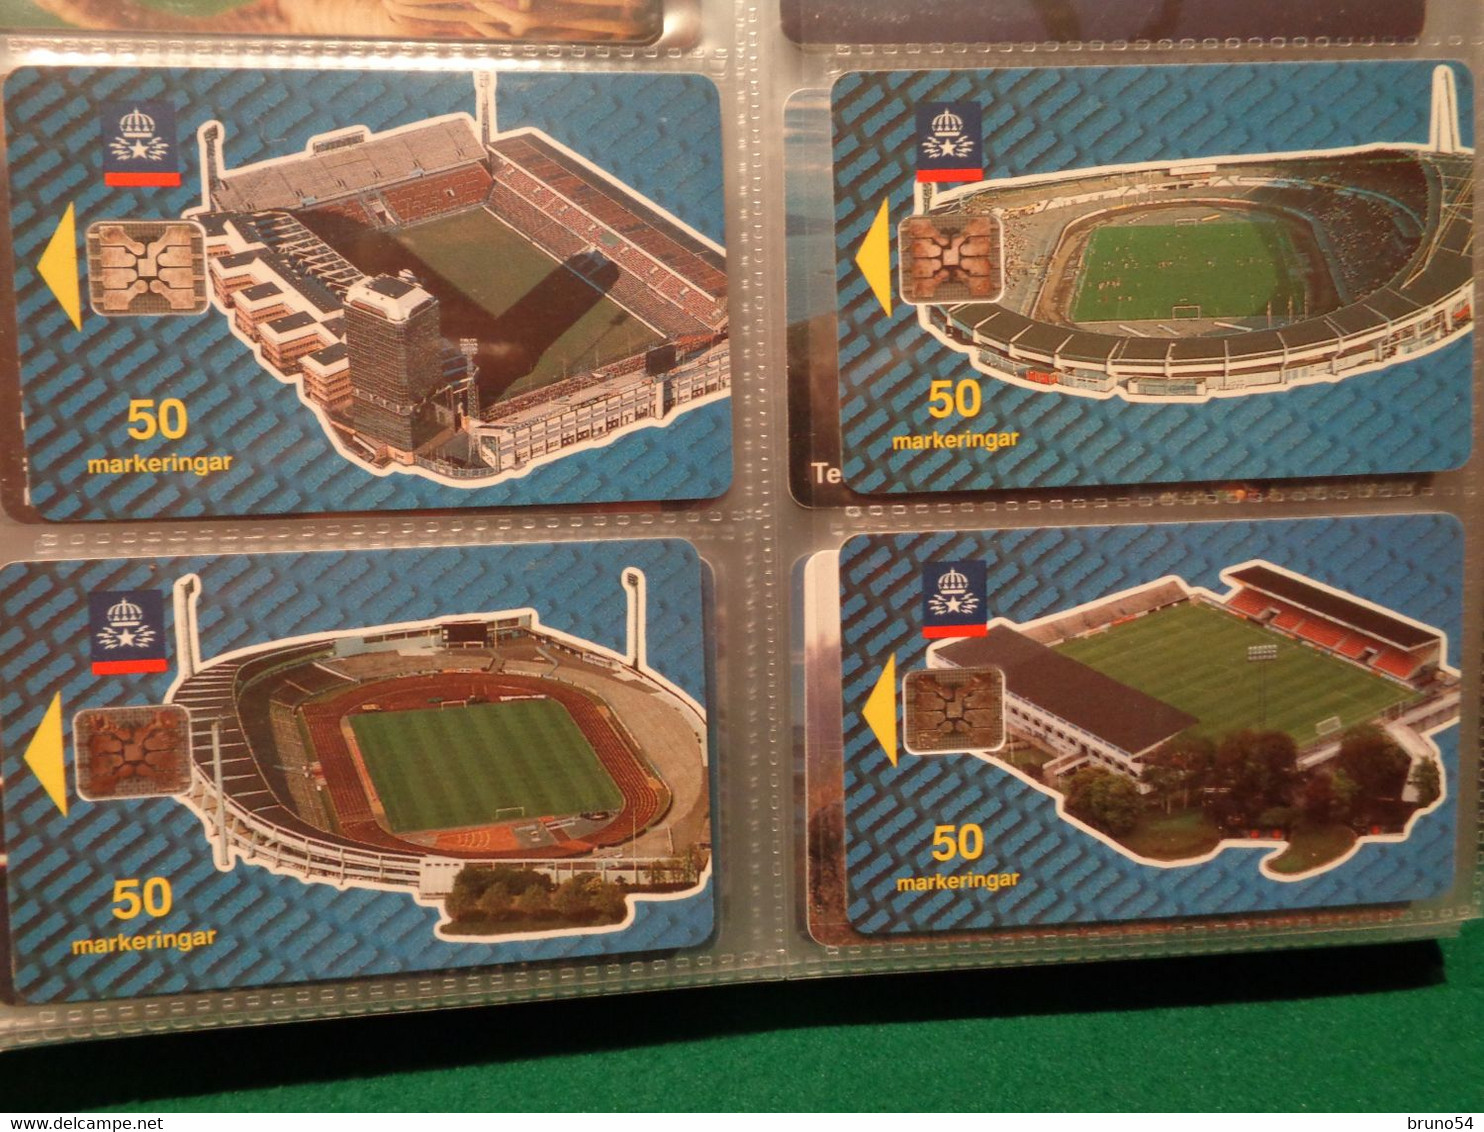 Set 4  Phonecards  From Sweden For European Football Championship 4 Stadiums,Solna,Goteborg,Norrkoping,Malmo 1992 - Sweden